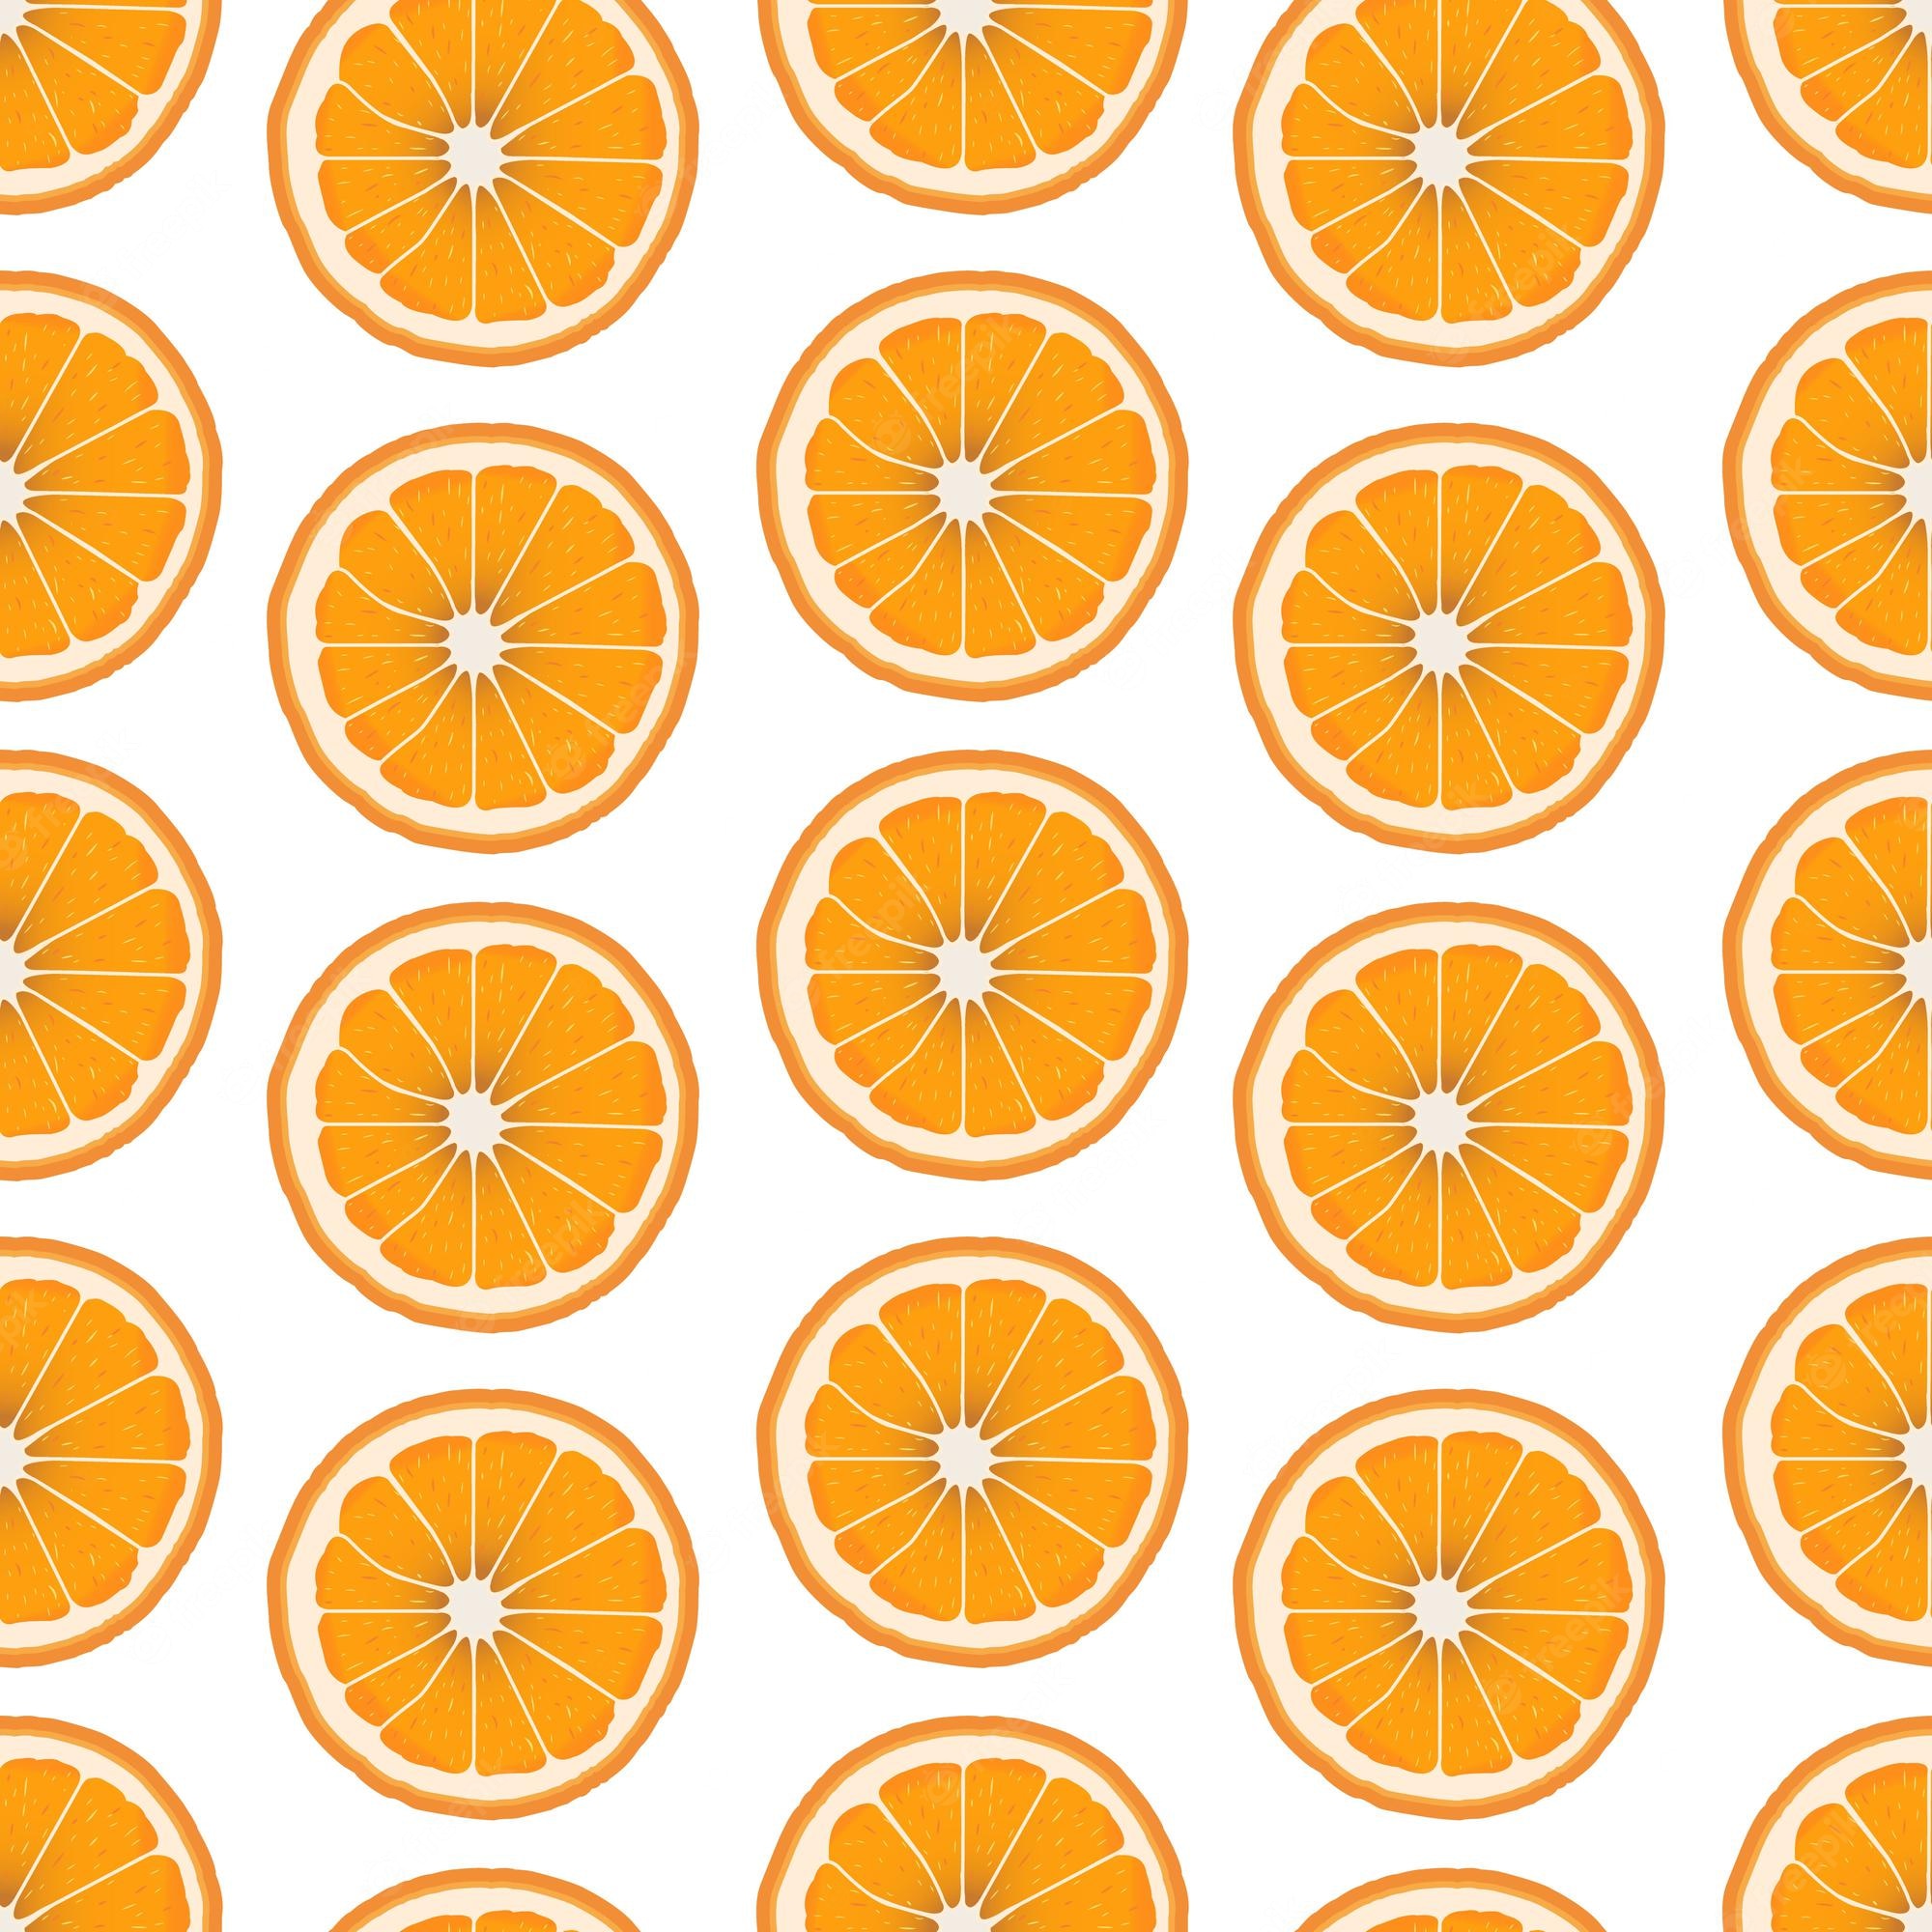 Premium Vector. Seamless pattern of fresh orange slices on a white background. organic fruits. cartoon style. vector illustration for design, paper, packaging, wallpaper